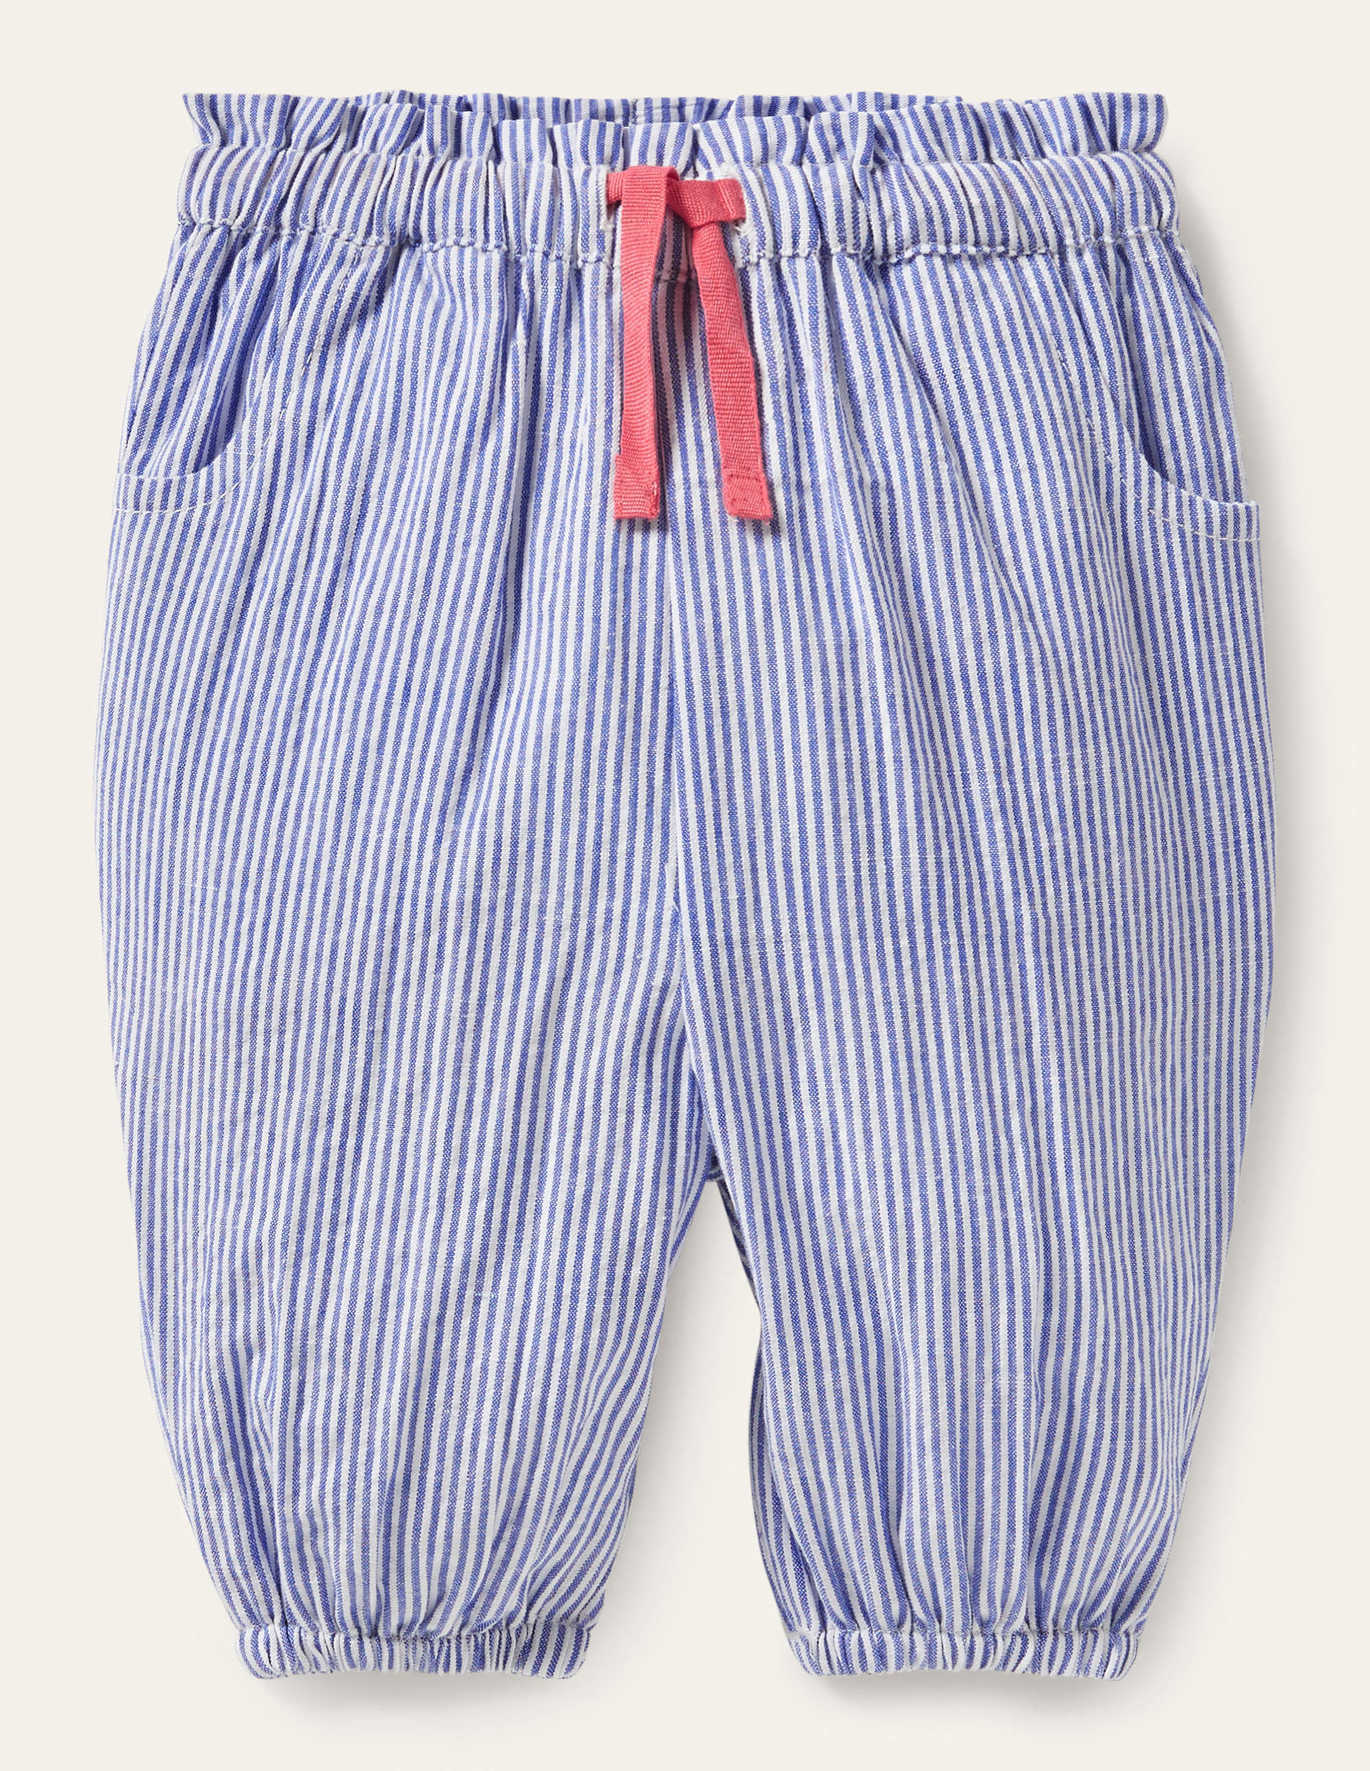 Boden Woven Paperbag Pants - Ivory/Bright Bluebell Ticking